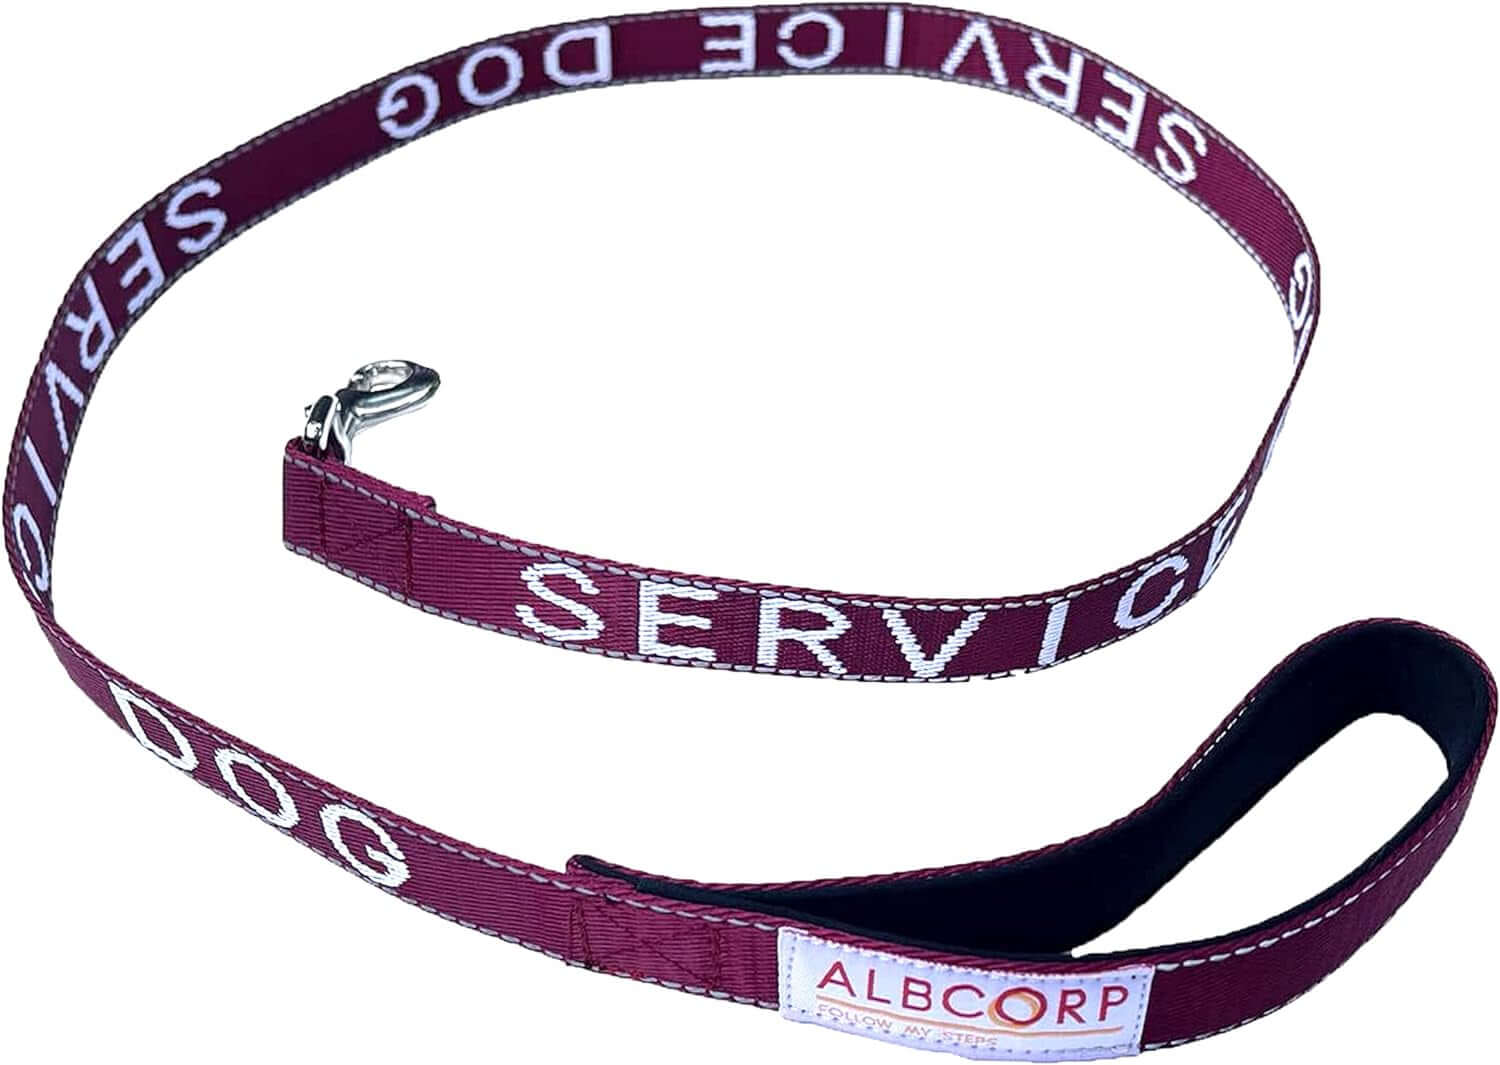 Service Dog Leash - Embroidered- with Padded Neoprene Handle and Reflective Threads, 4 Feet, for Harnesses, Vests or Collars, Maroon